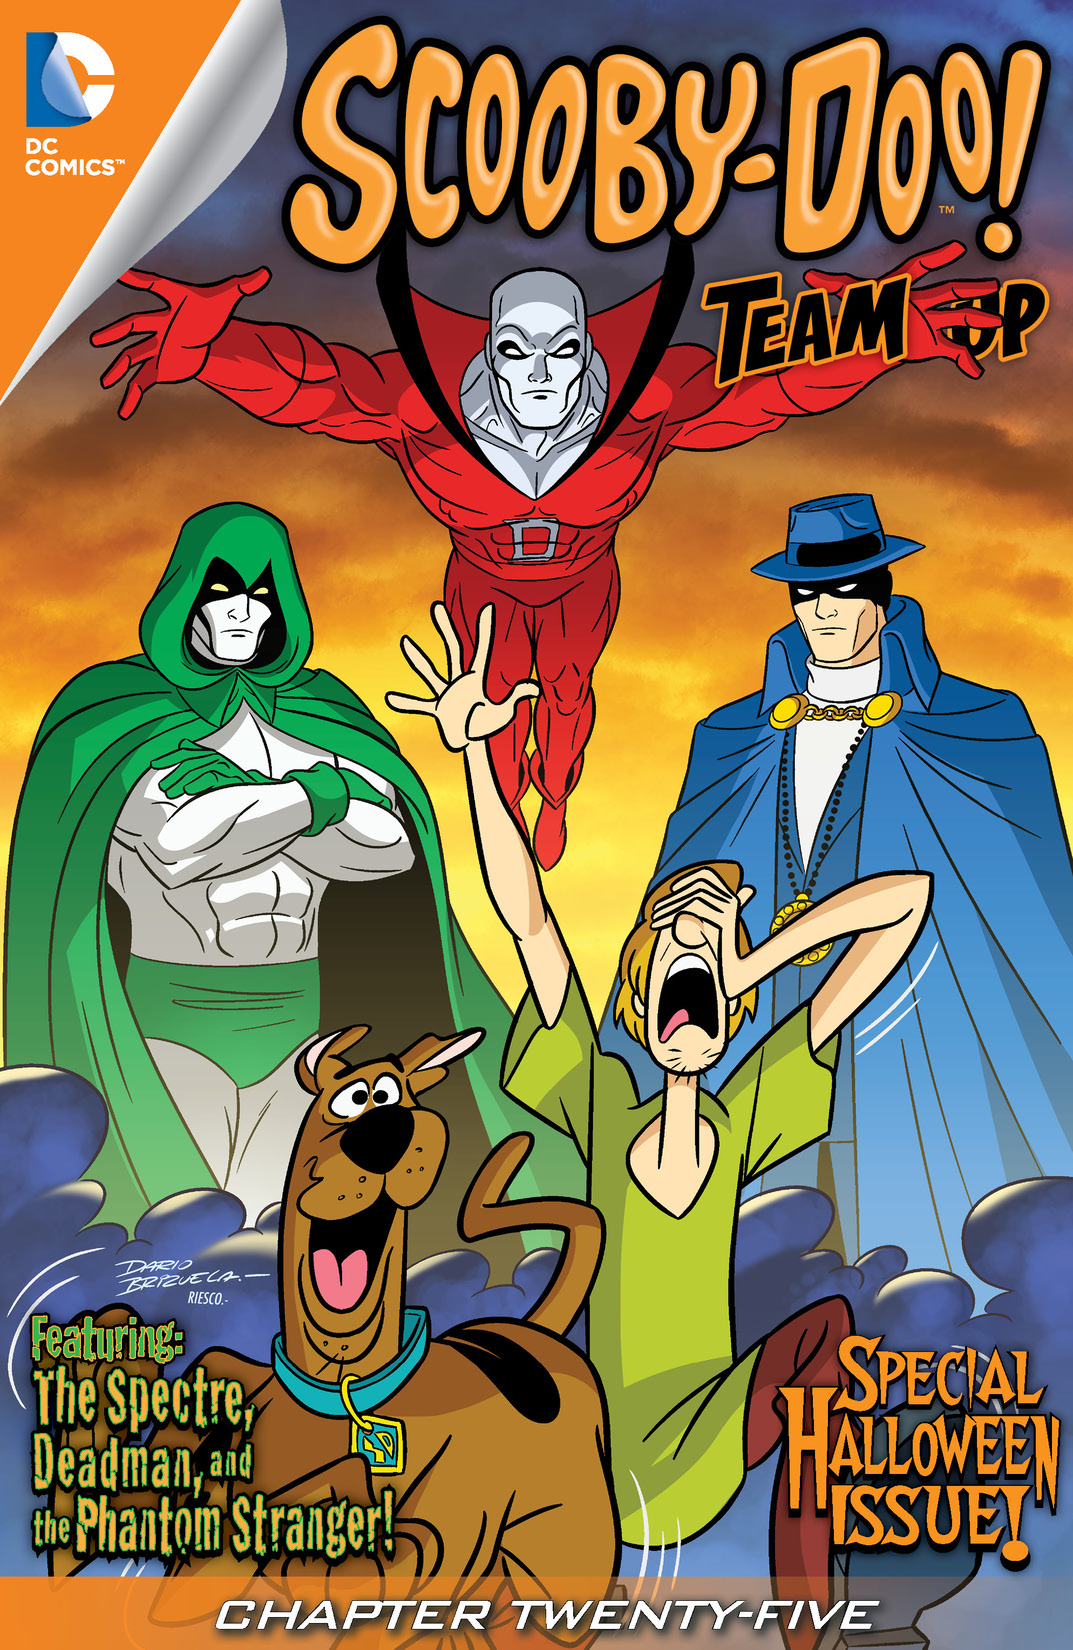 Scooby-Doo Team-Up #25 preview images